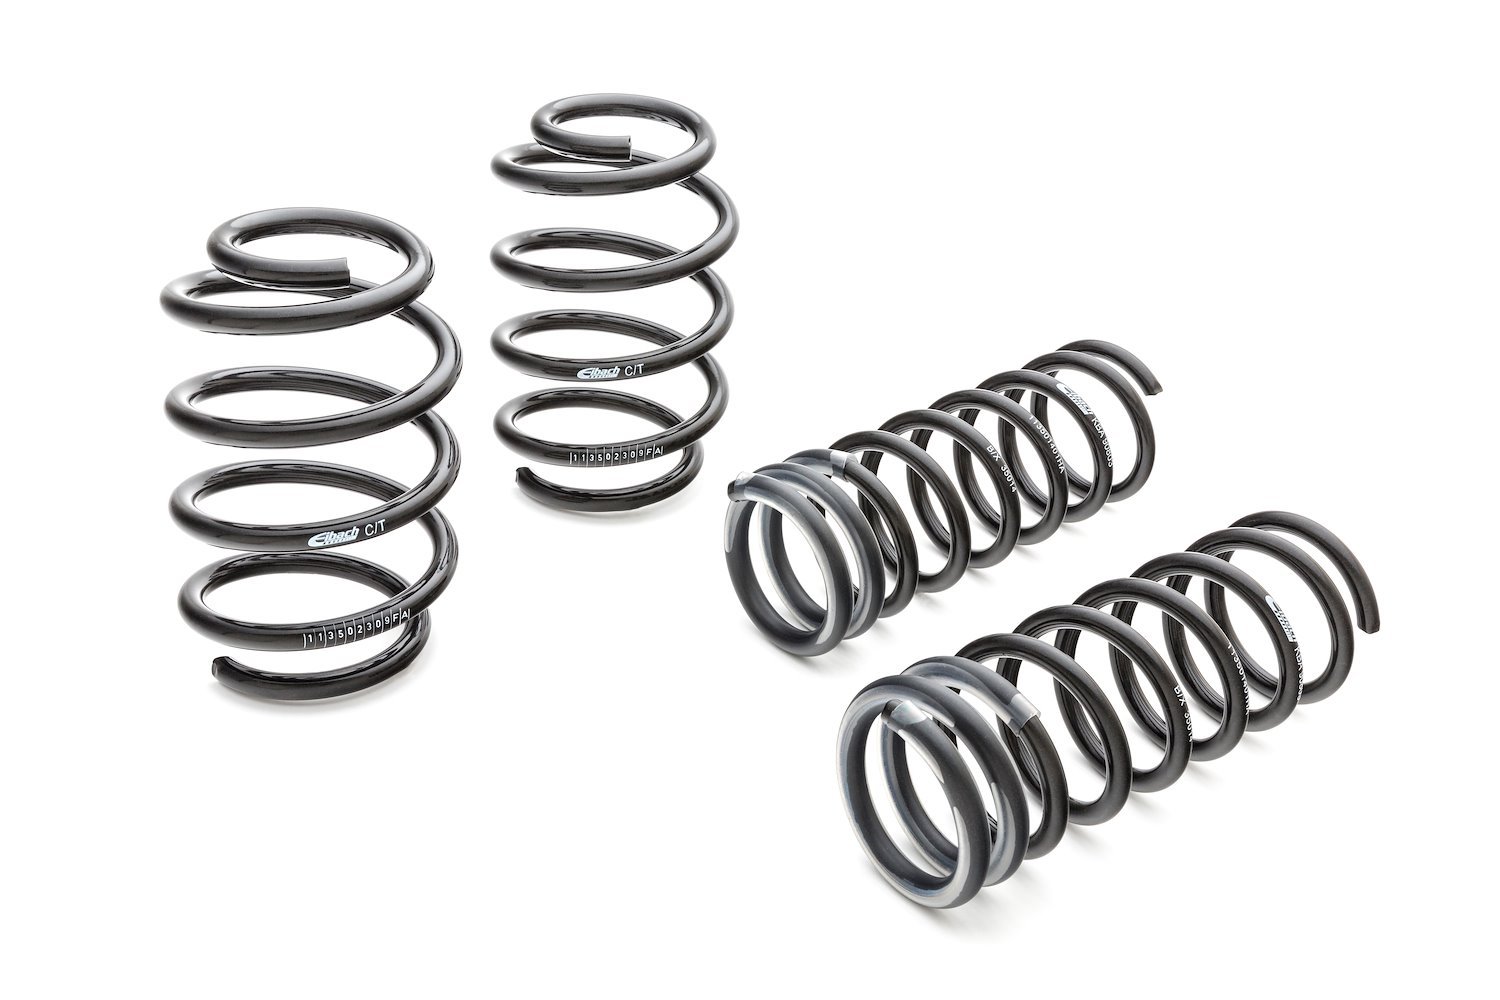 82106.140 Pro-Kit Lowering Springs 2012-2016 Camry 4cyl - 1.500 in. Front/1.200 in. Rear Drop